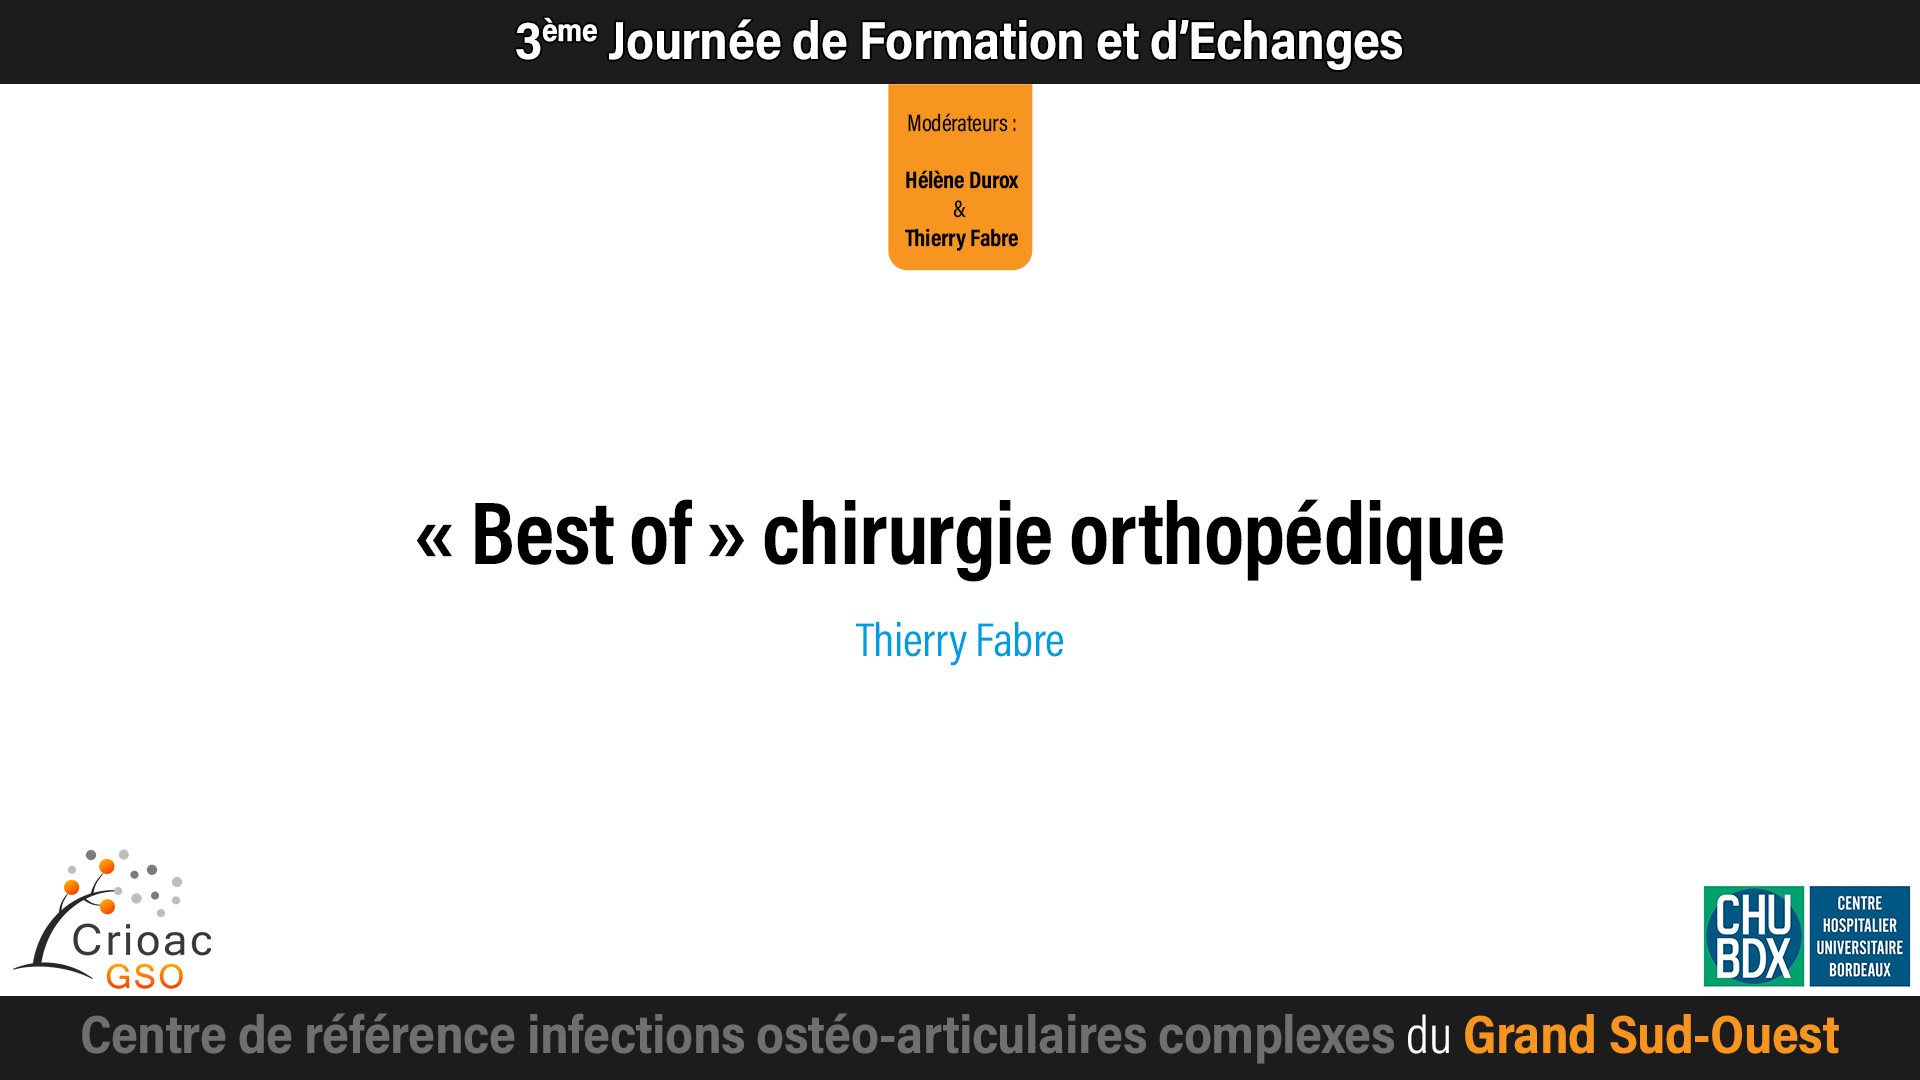 « Best of » chirurgie orthopédique